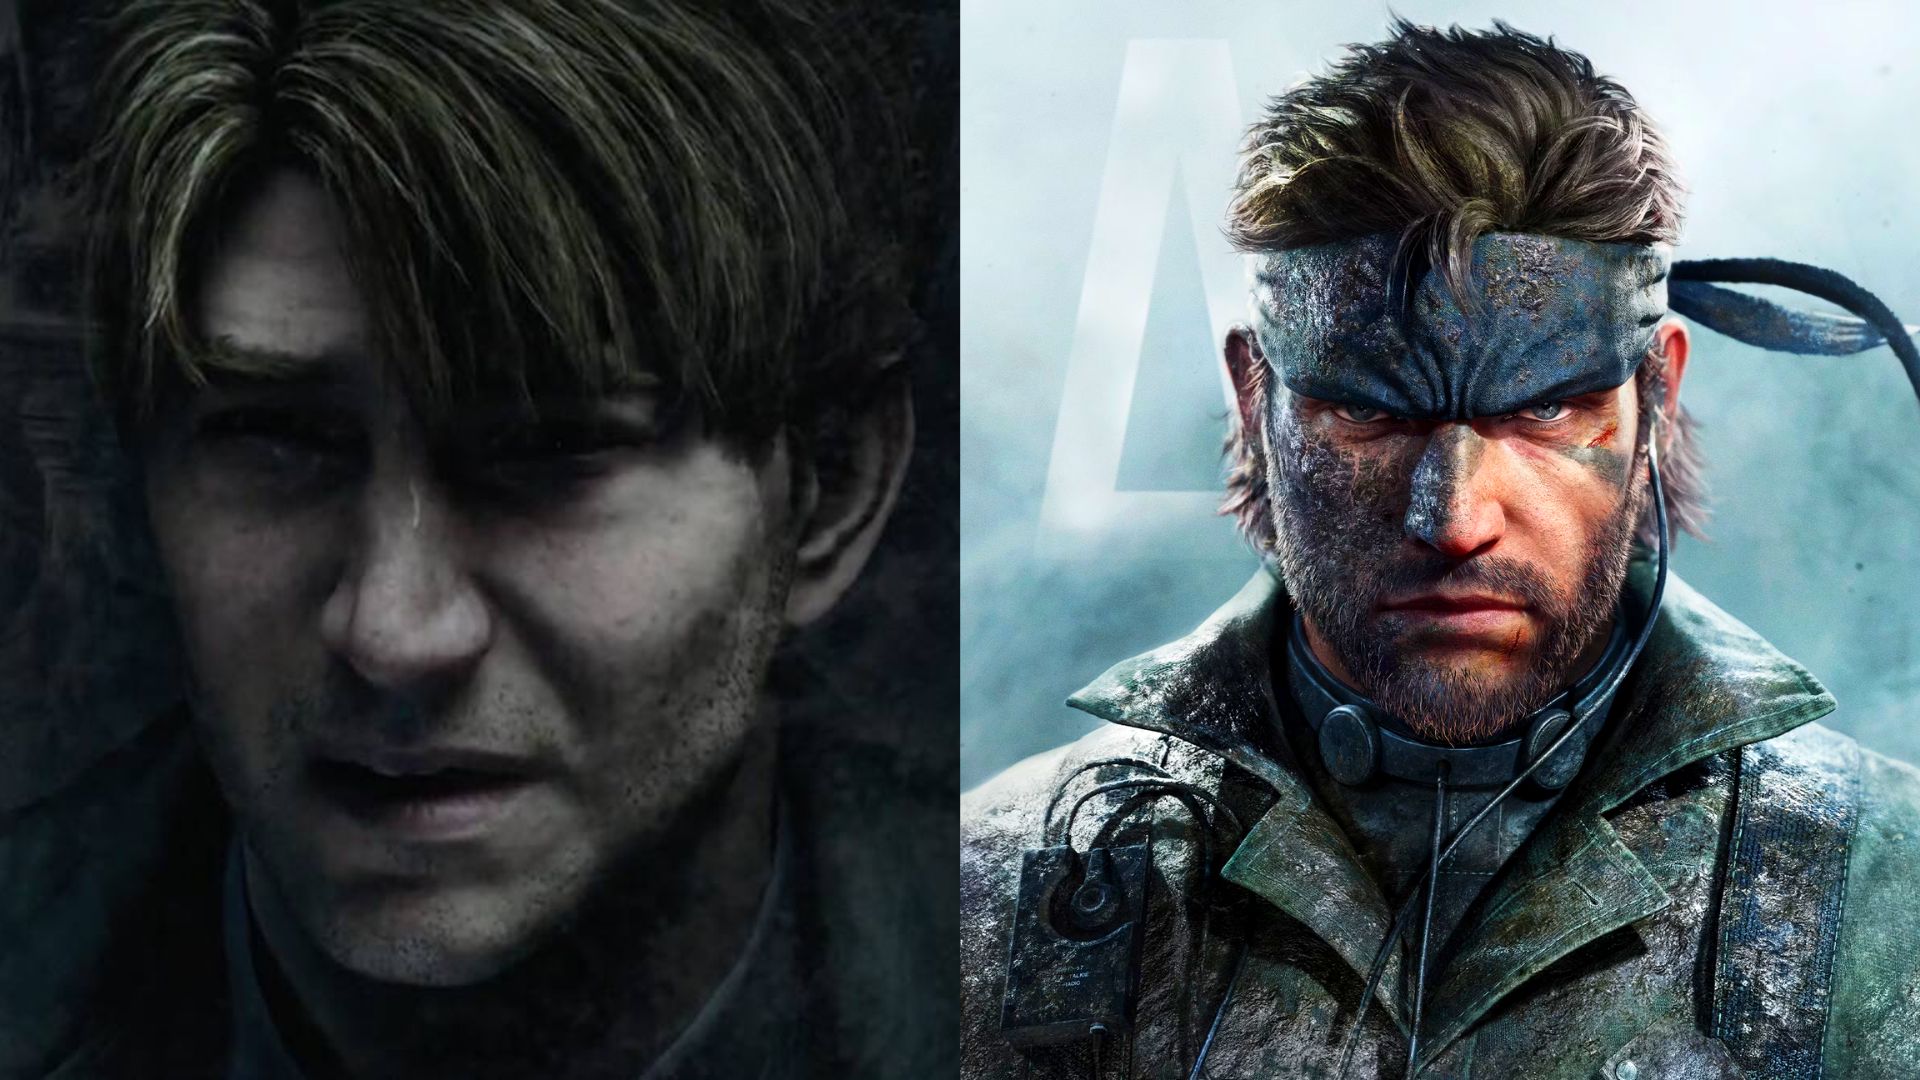 MGS Delta and Silent Hill 2